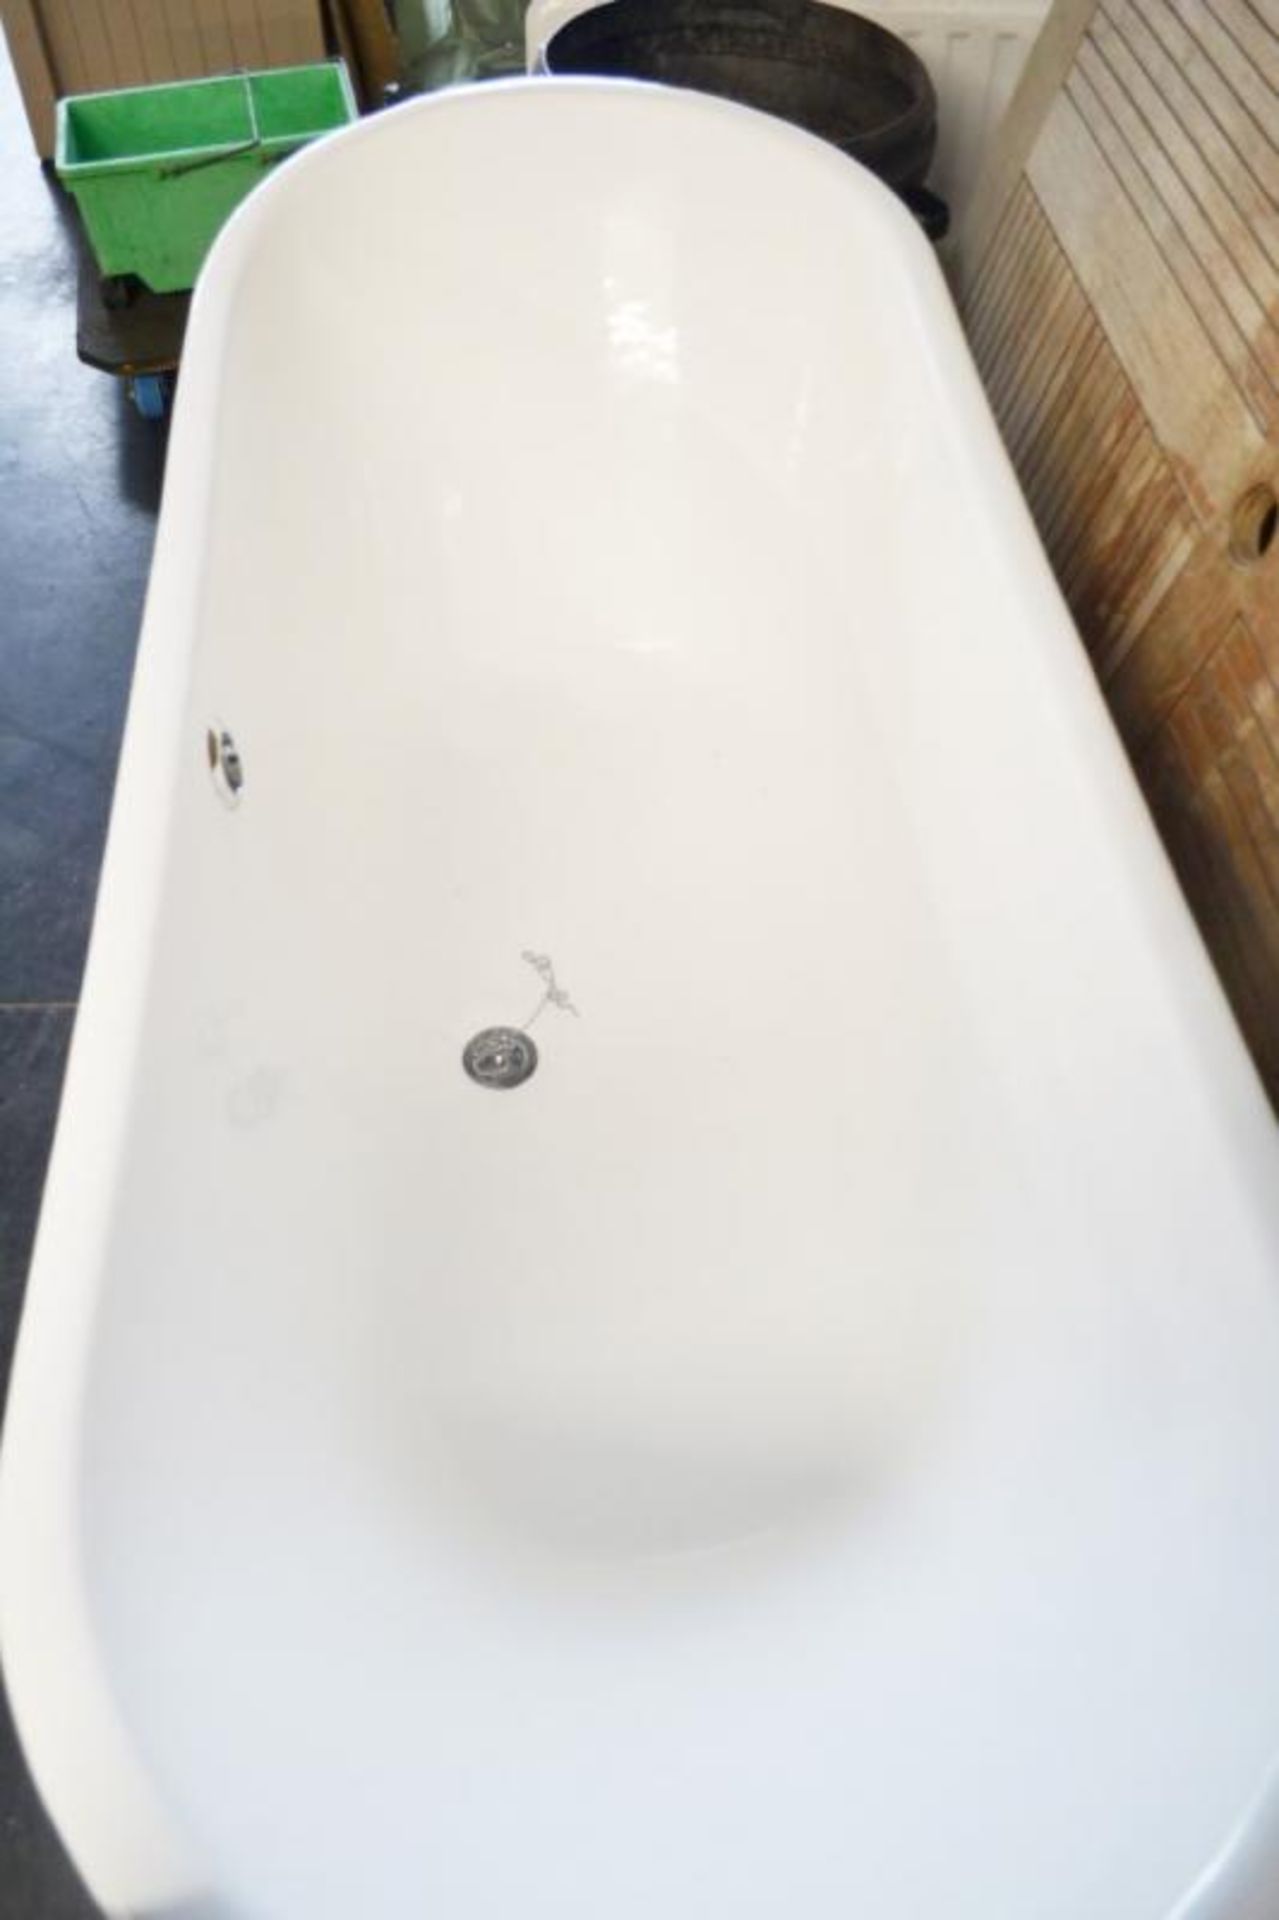 1 x Cast Iron Bath With Stainless Steel Exterior - CL439 - Location: Ilkley LS29 - Used In Good Cond - Image 2 of 8